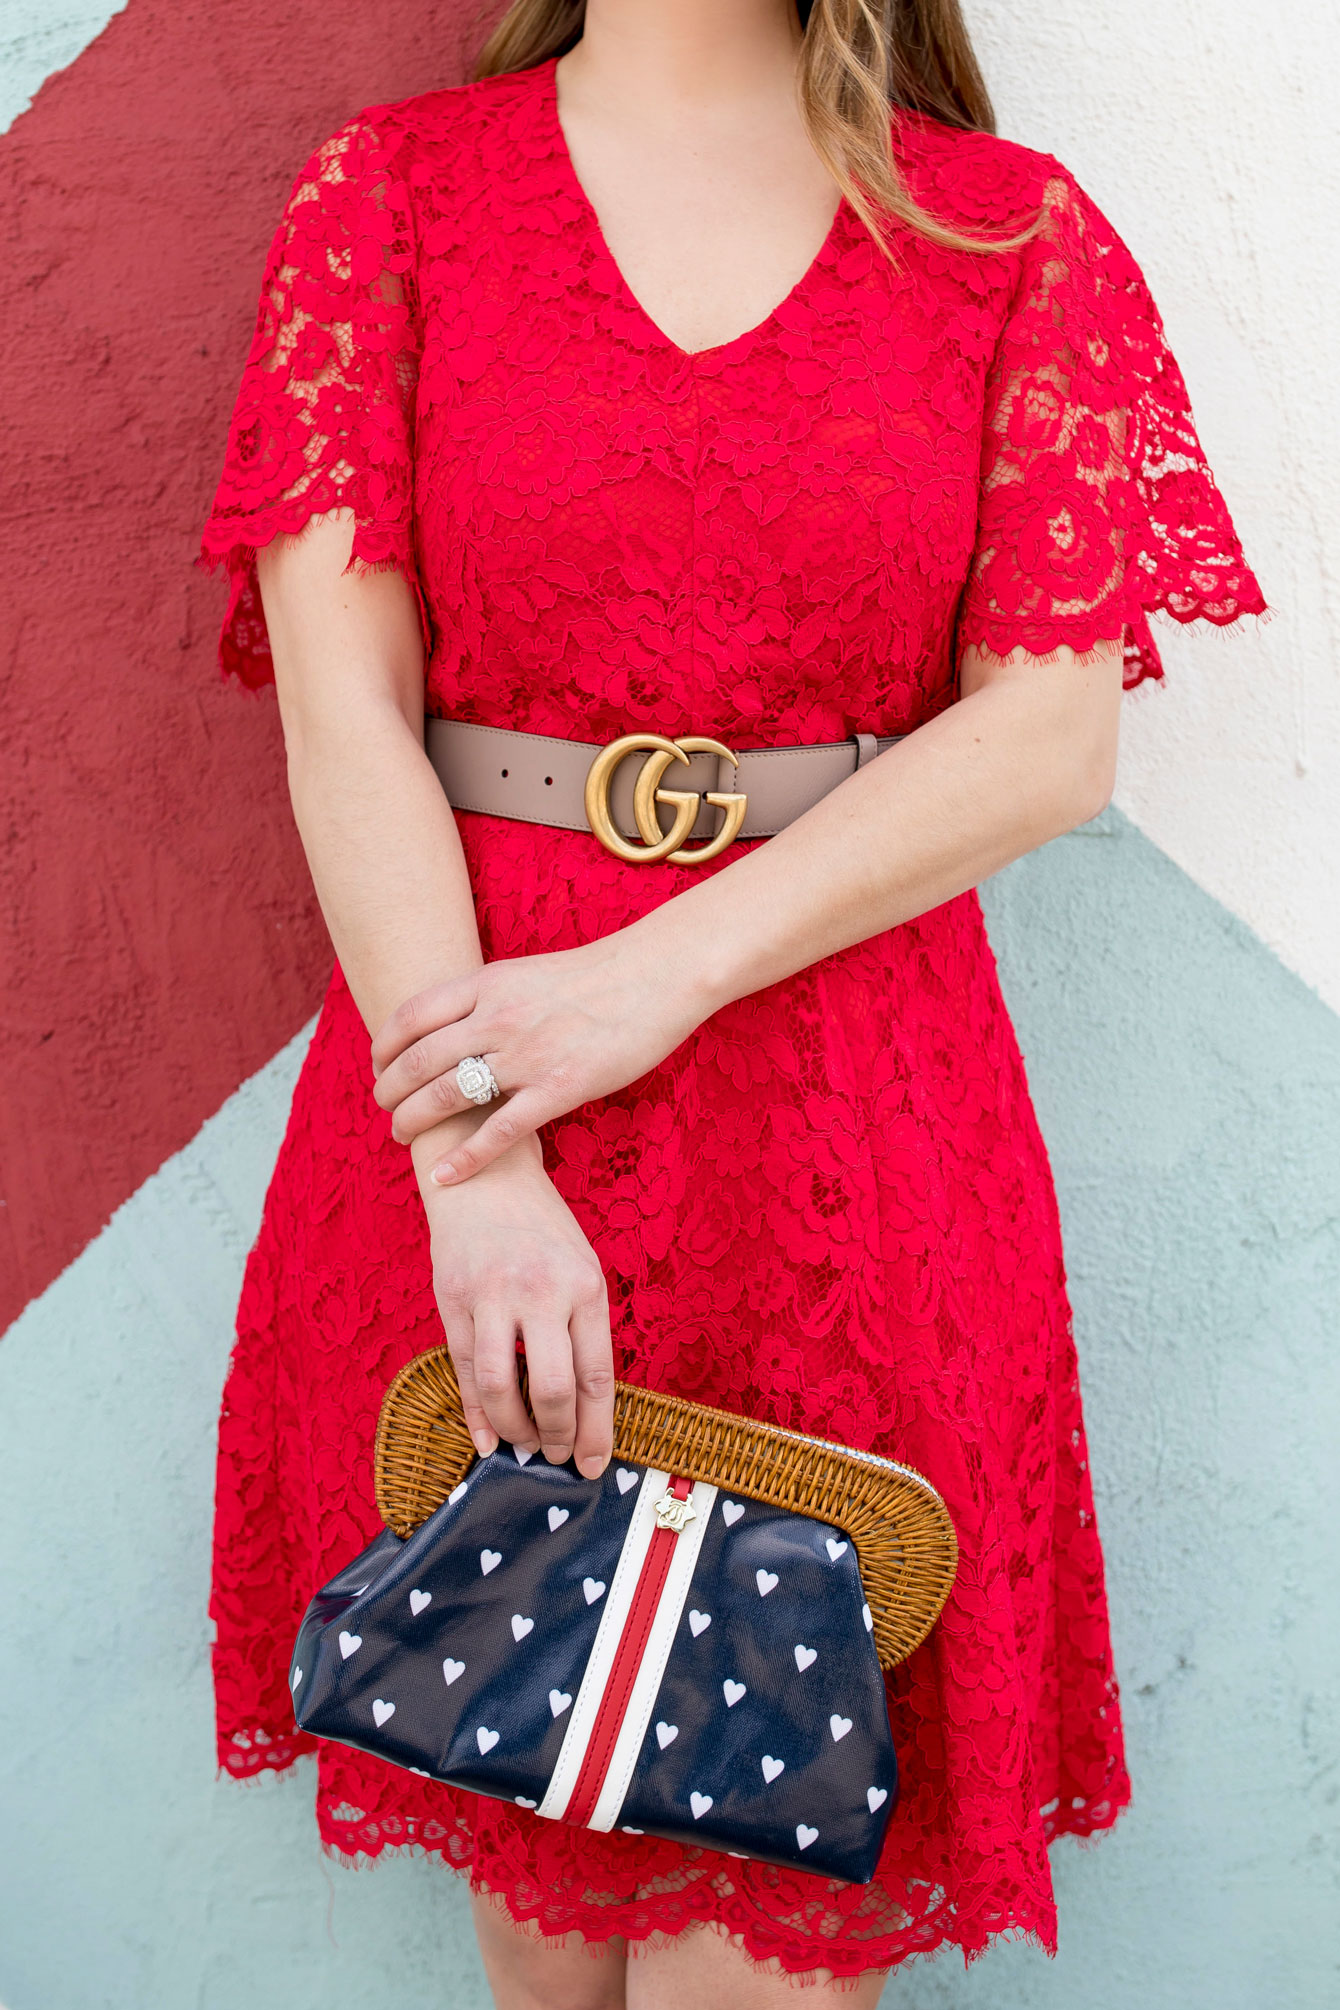 Draper James Red Lace Dress and Gucci Belt in Houston